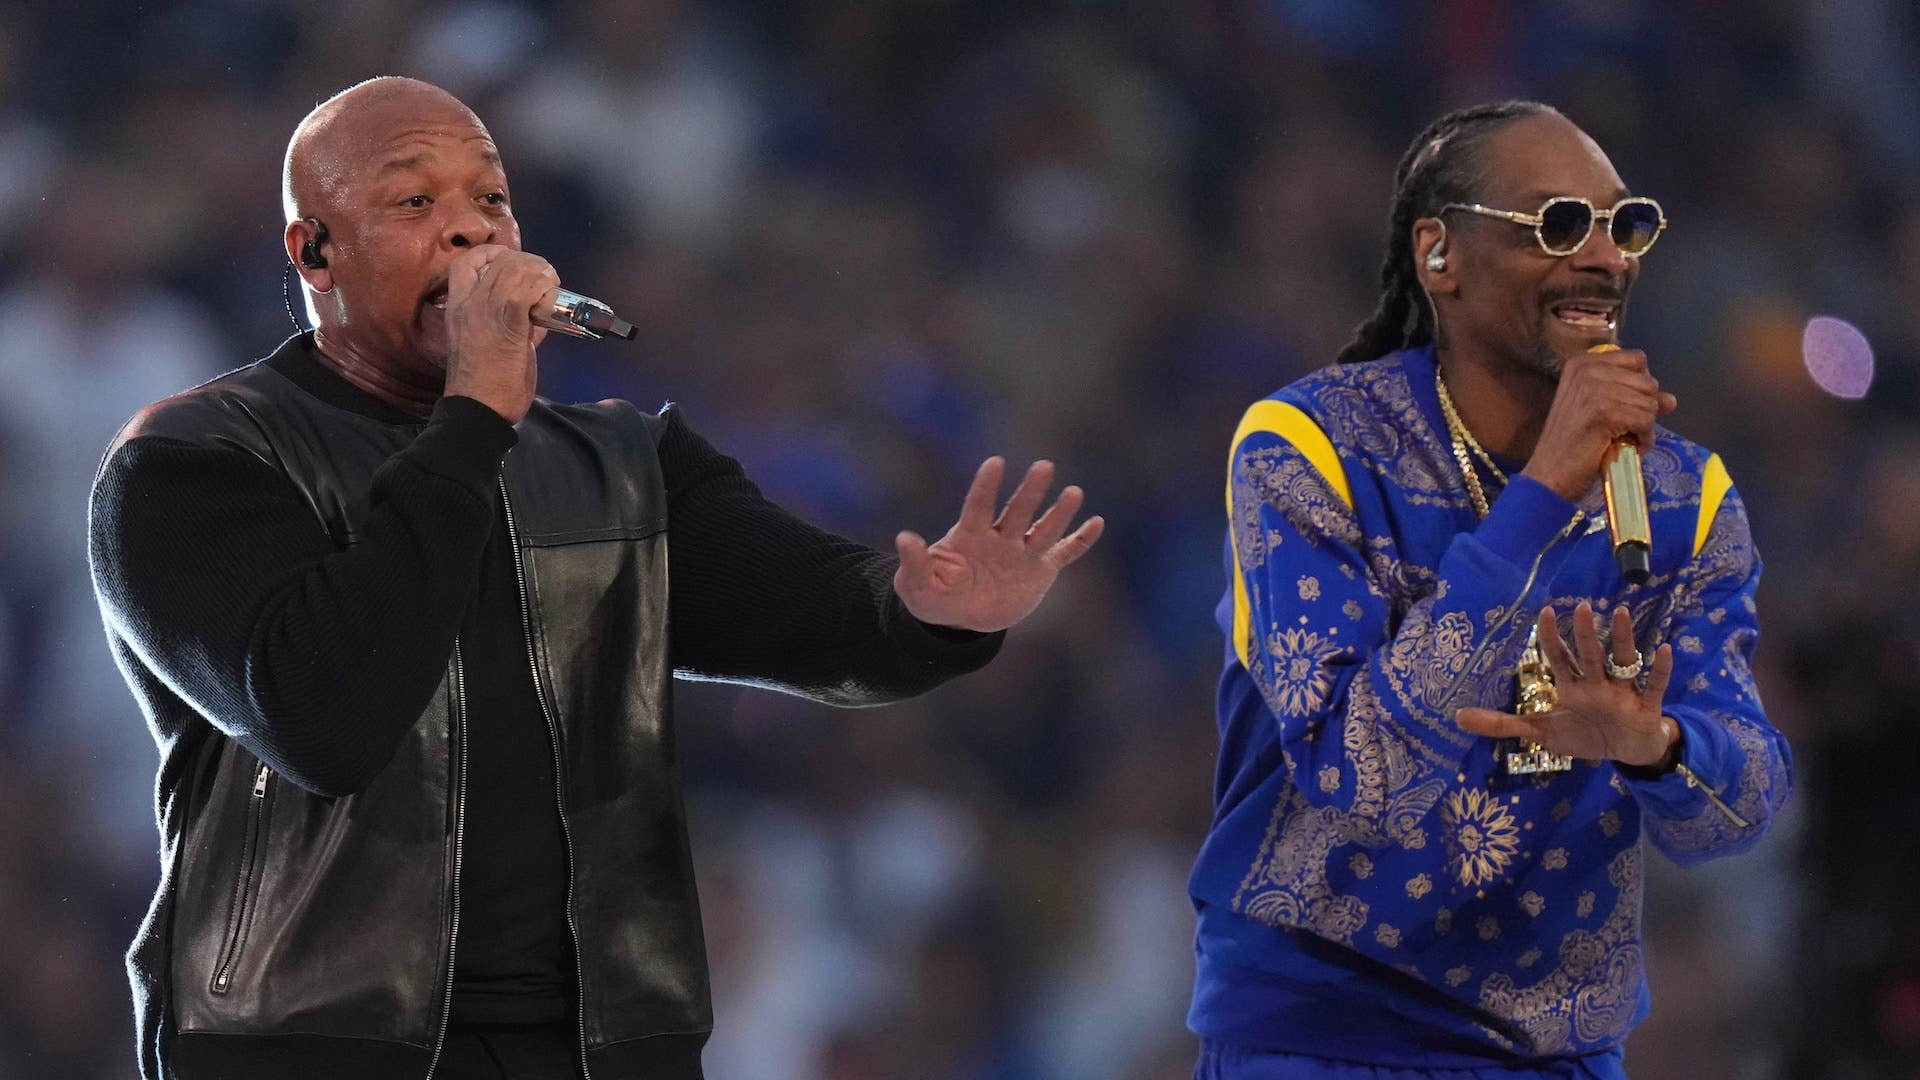 Dr. Dre performs with Snoop Dogg in the Pepsi Halftime Show